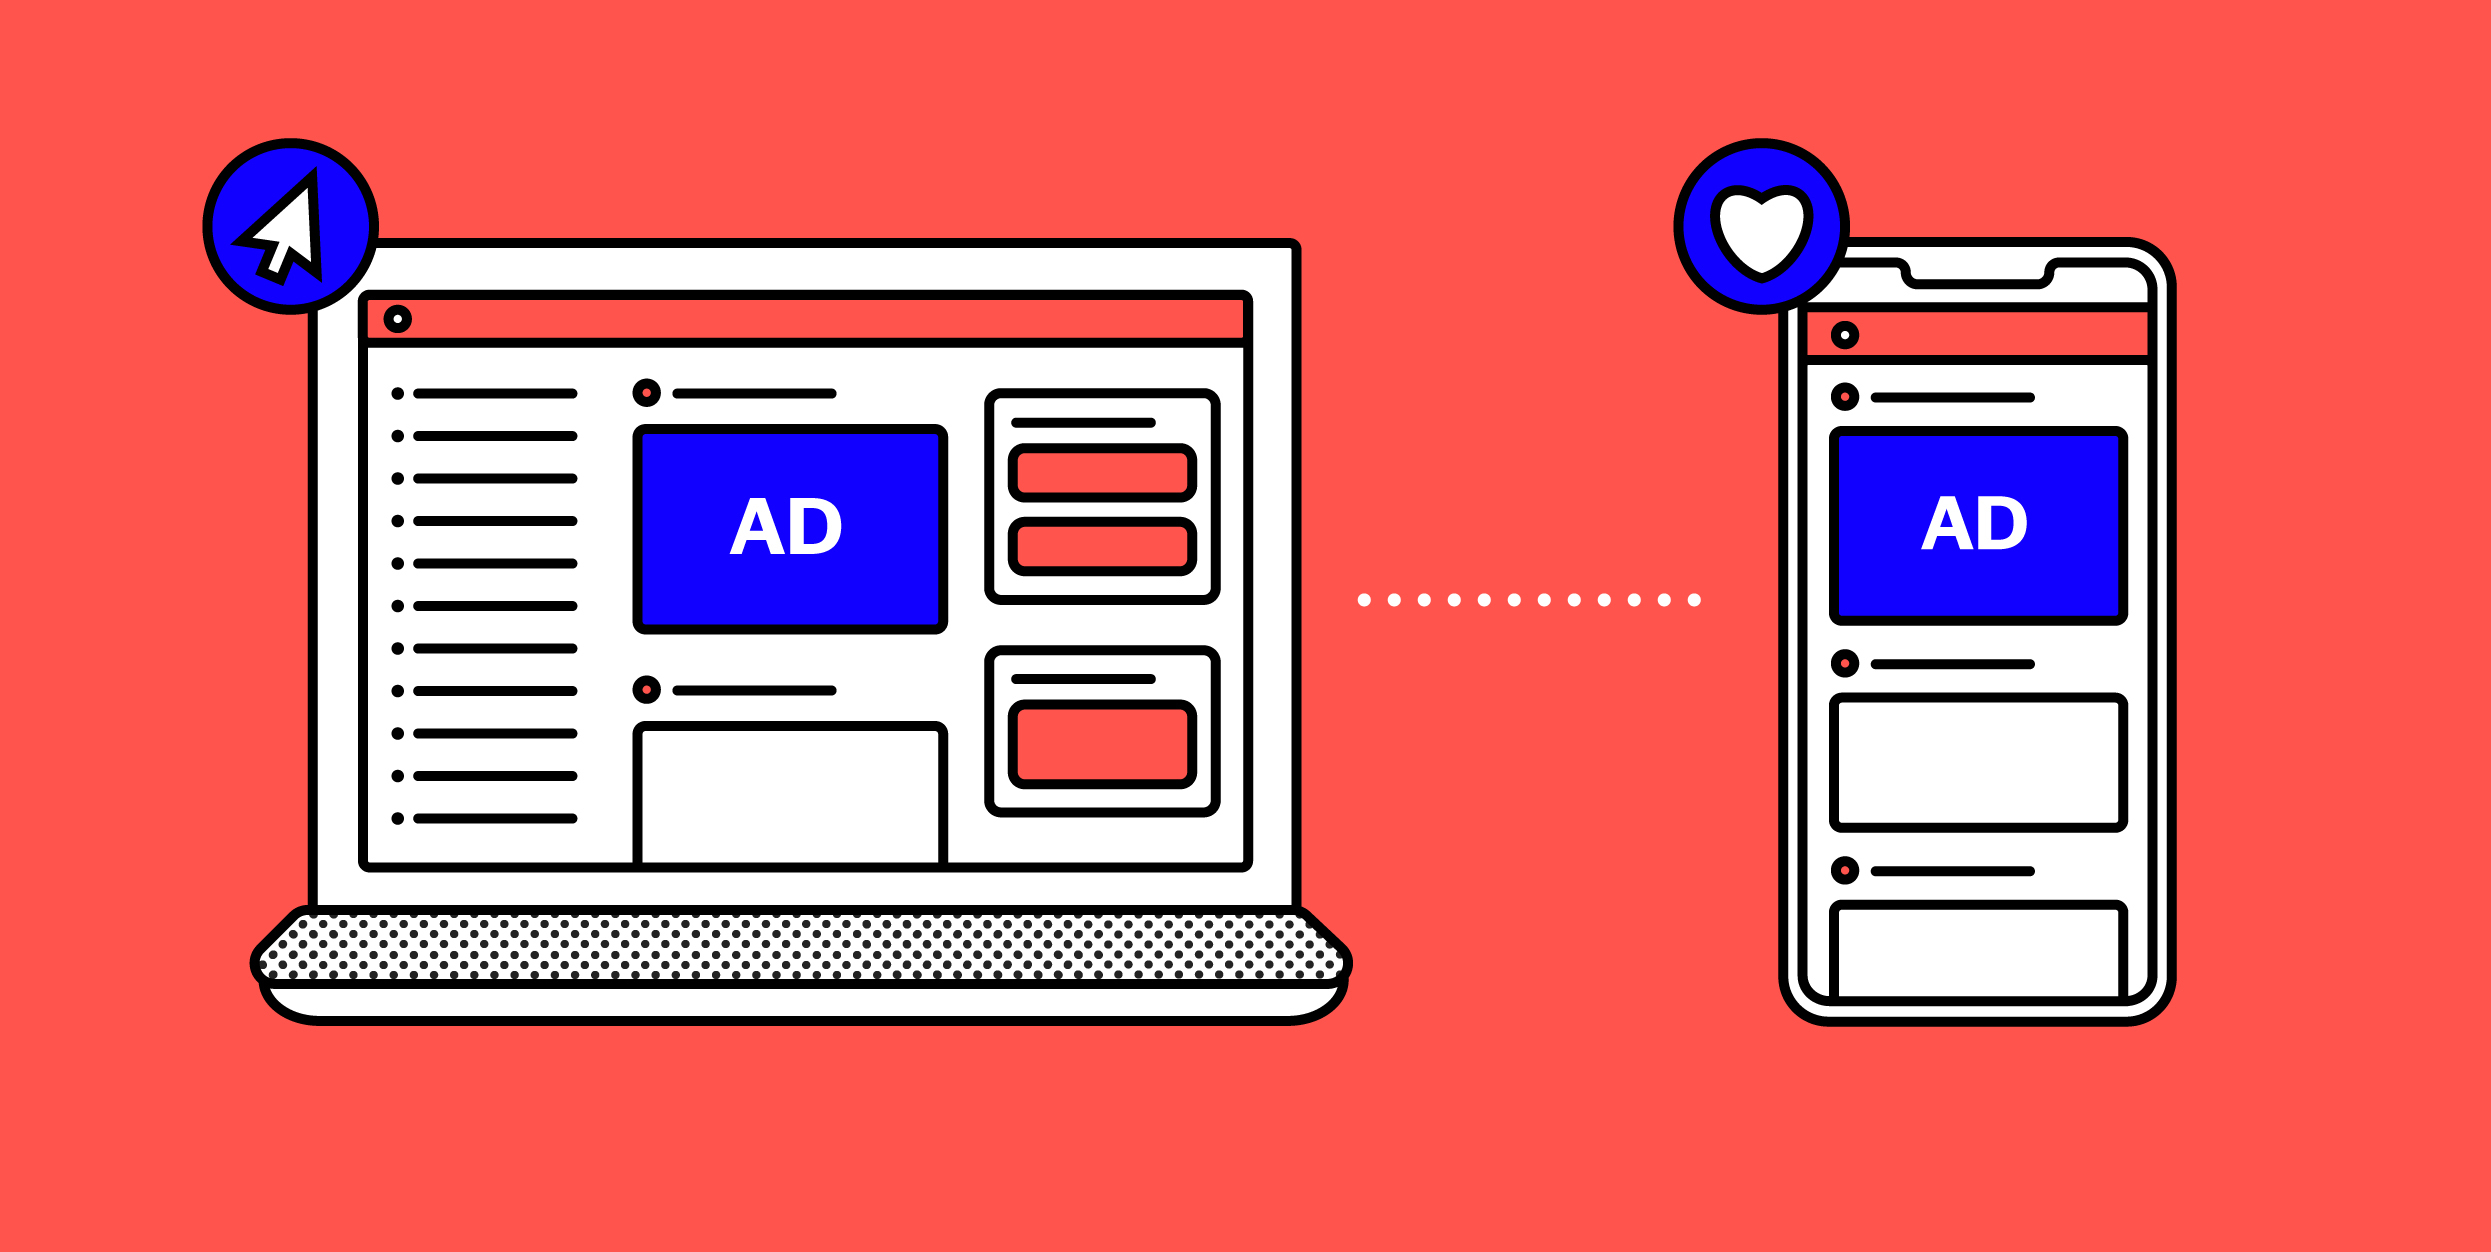 ad feature mockup graphic for desktop and mobile - Square 205